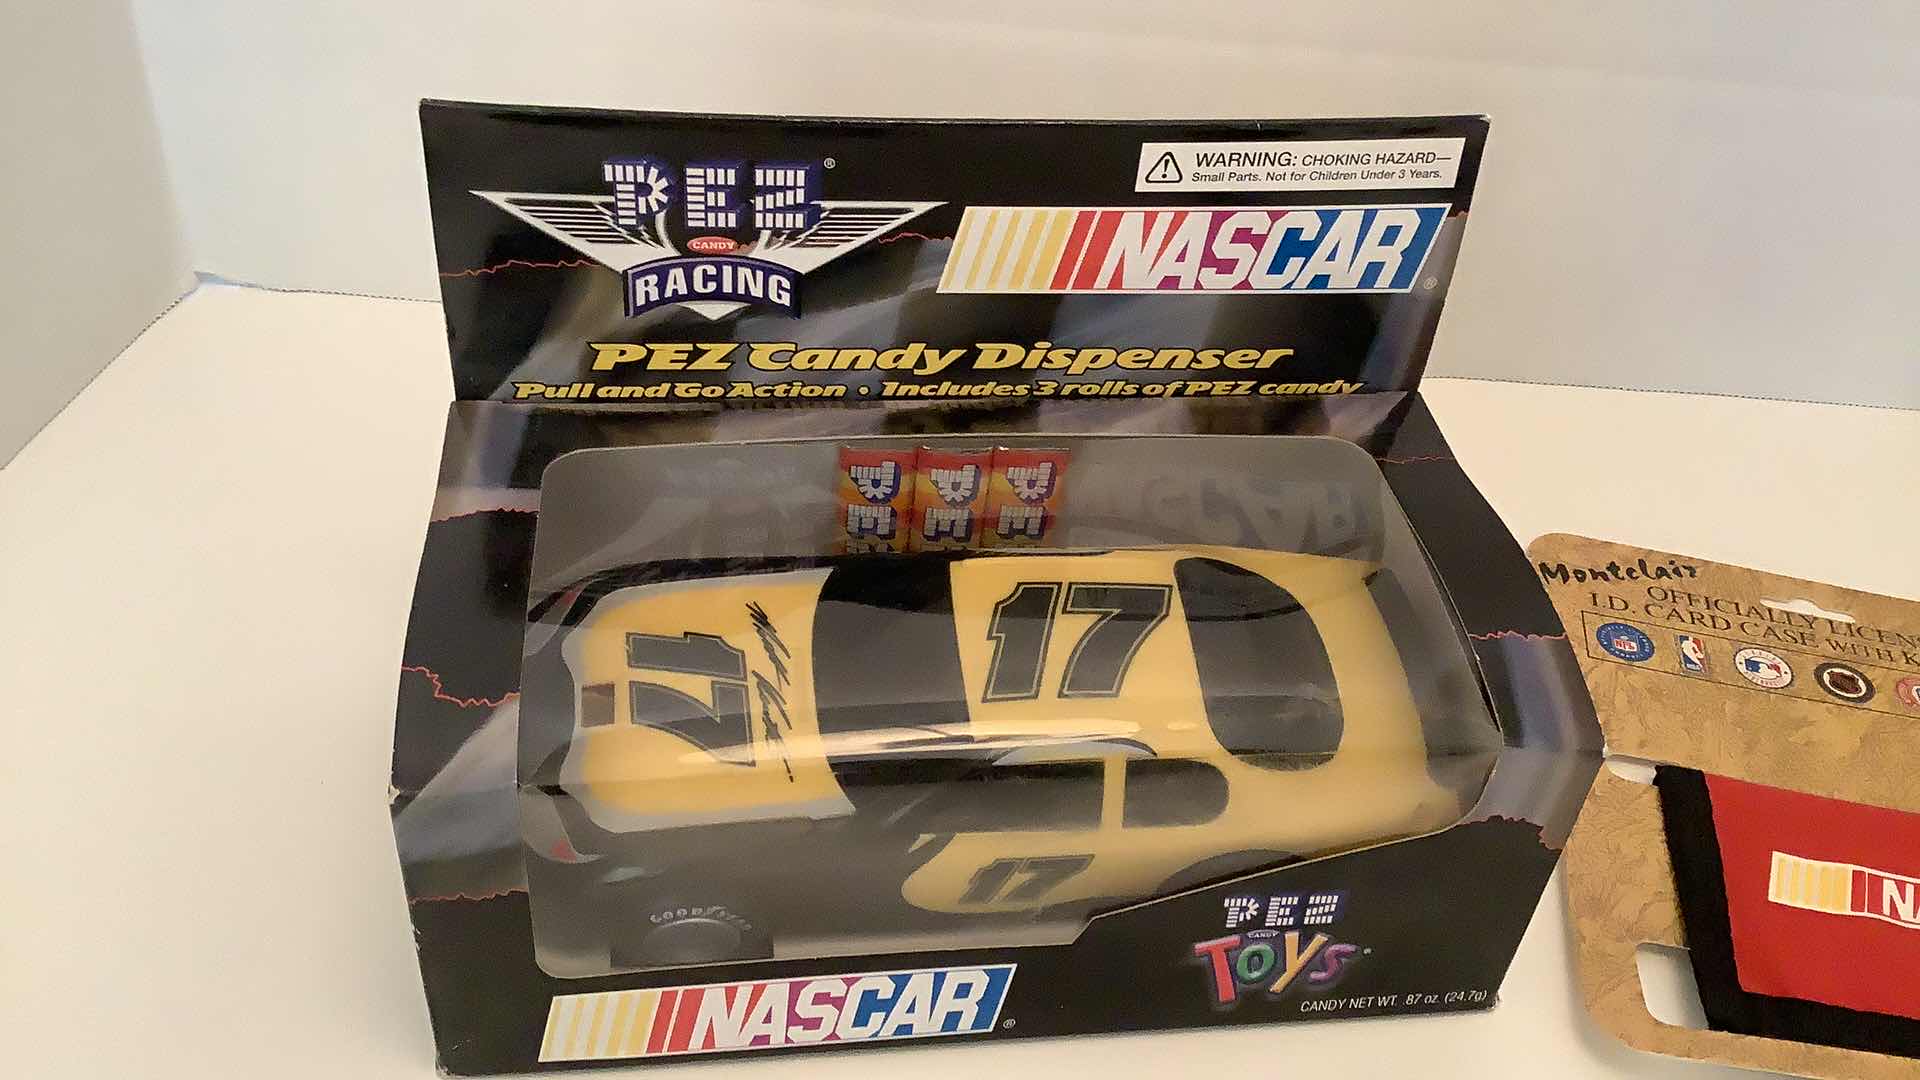 Photo 3 of NASCAR #17 PEZ CANDY DISPENSER AND CARD CASE